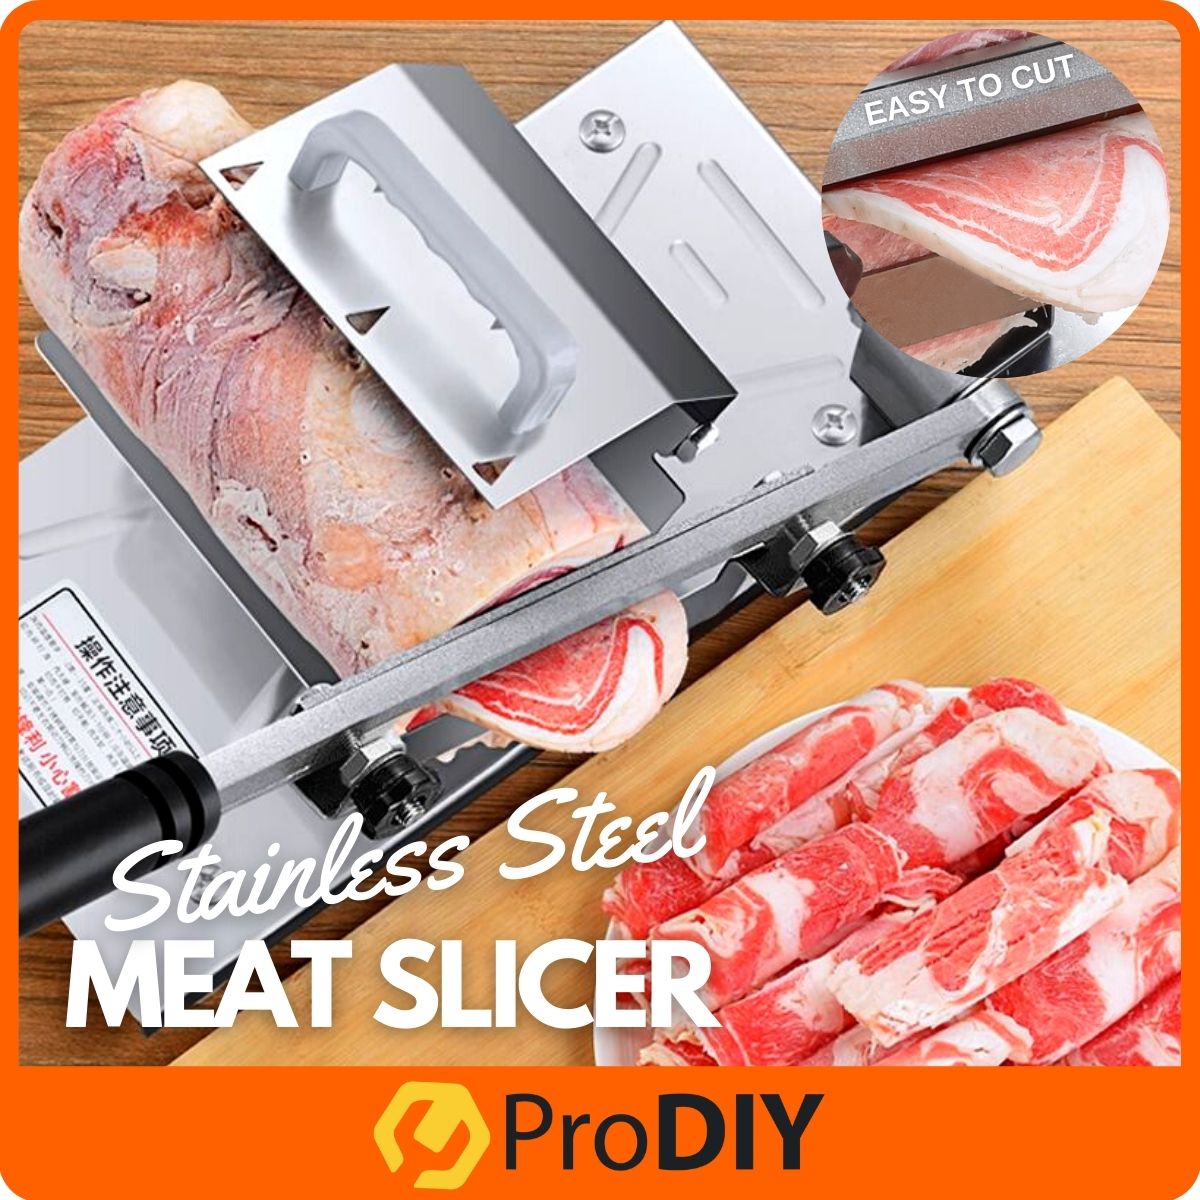 Stainless Steel Meat Slicer Manual Adjustable Frozen Meat High Quality Mutton Beef Mesin Potong Hiris Daging